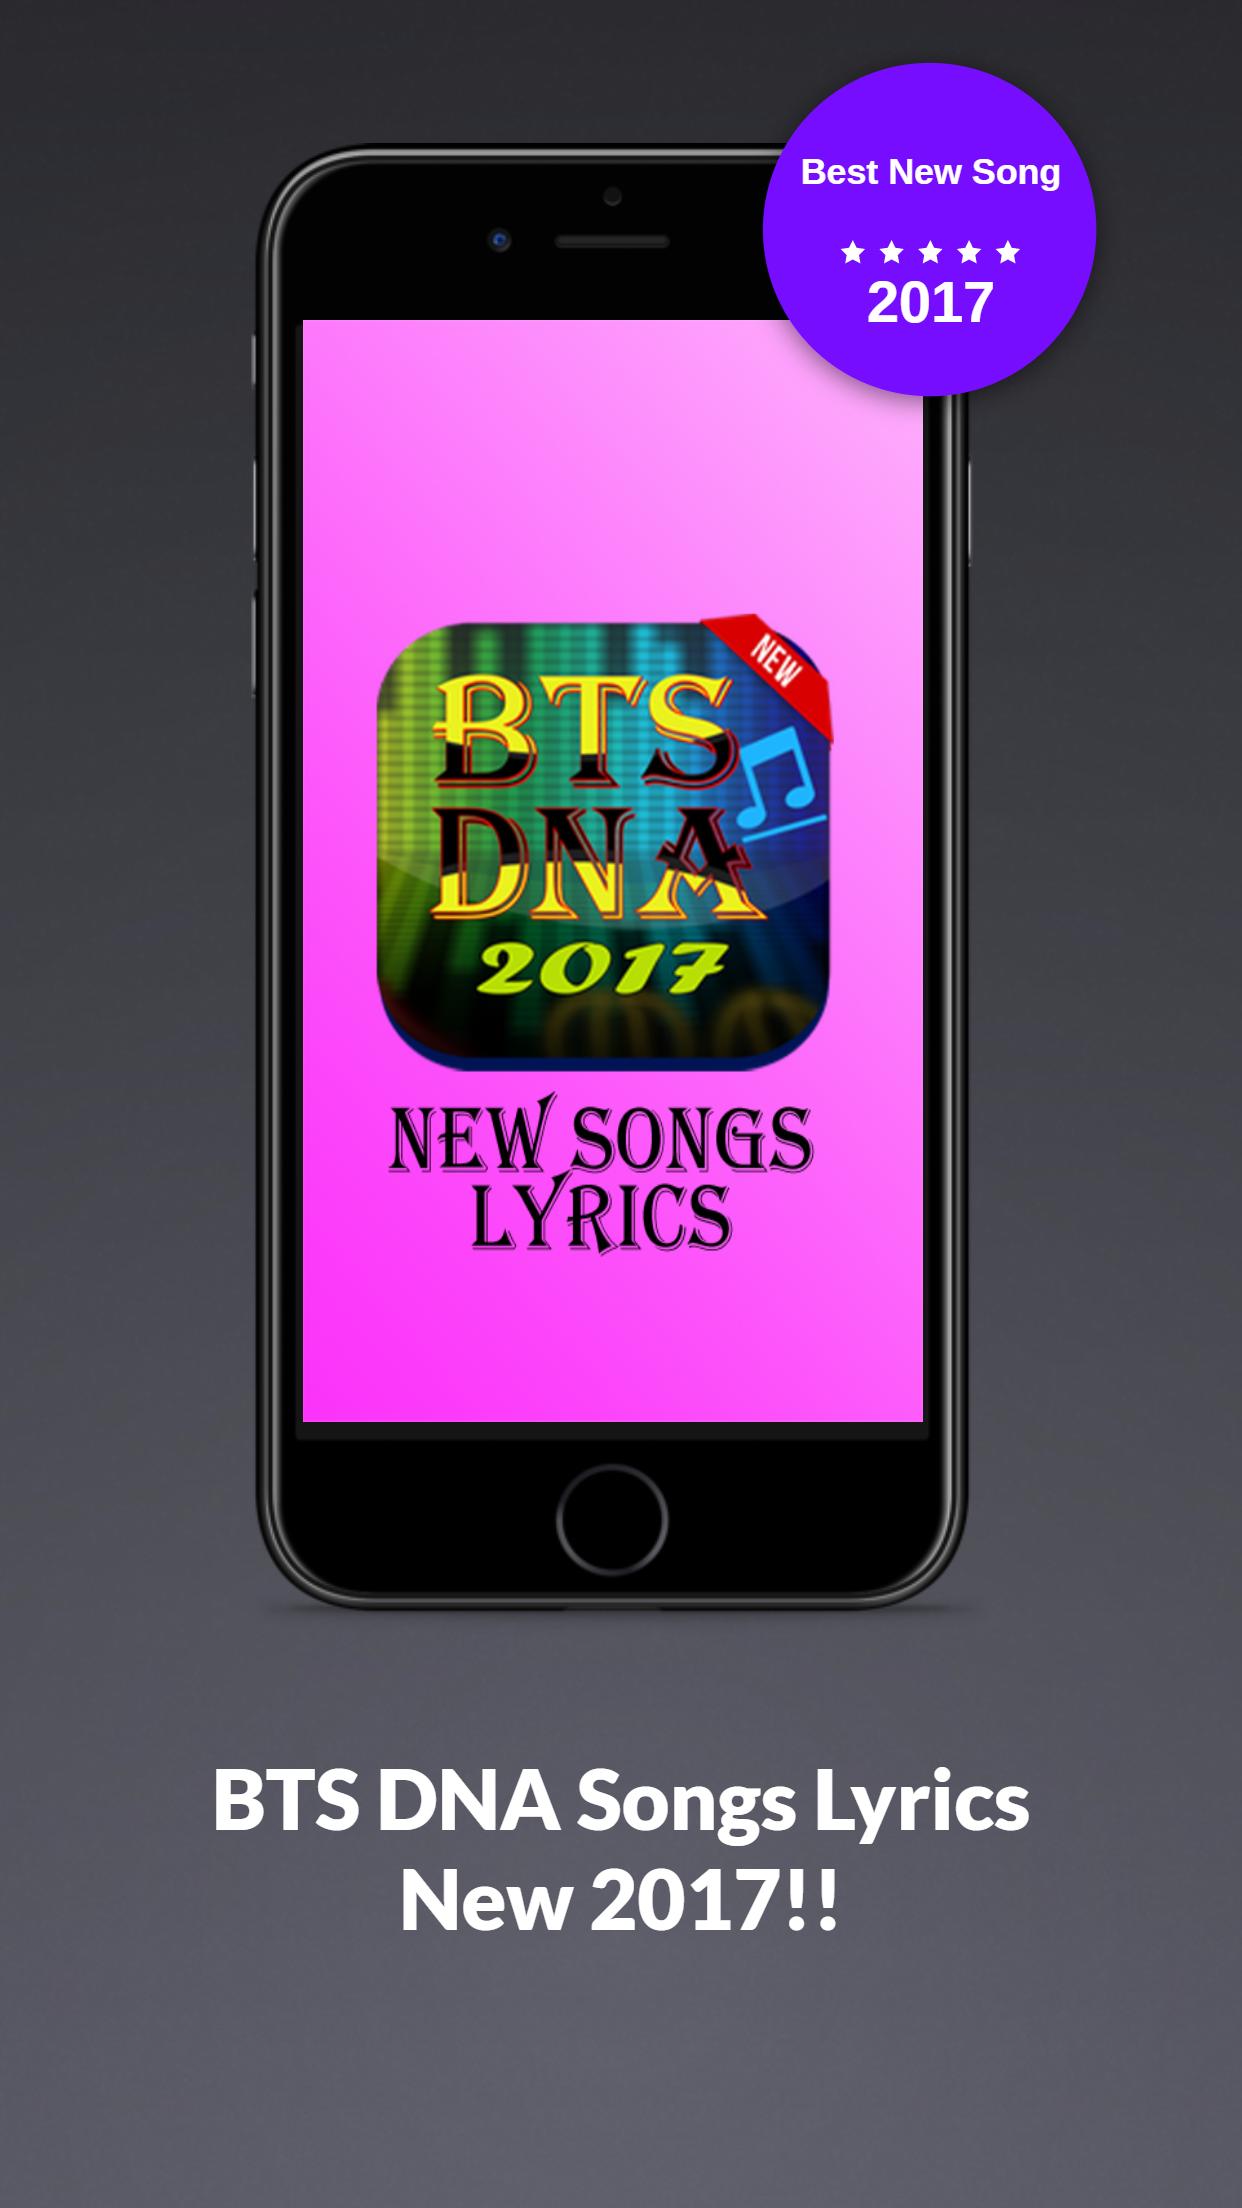 Bts Dna Songs Lyrics 2017 For Android Apk Download